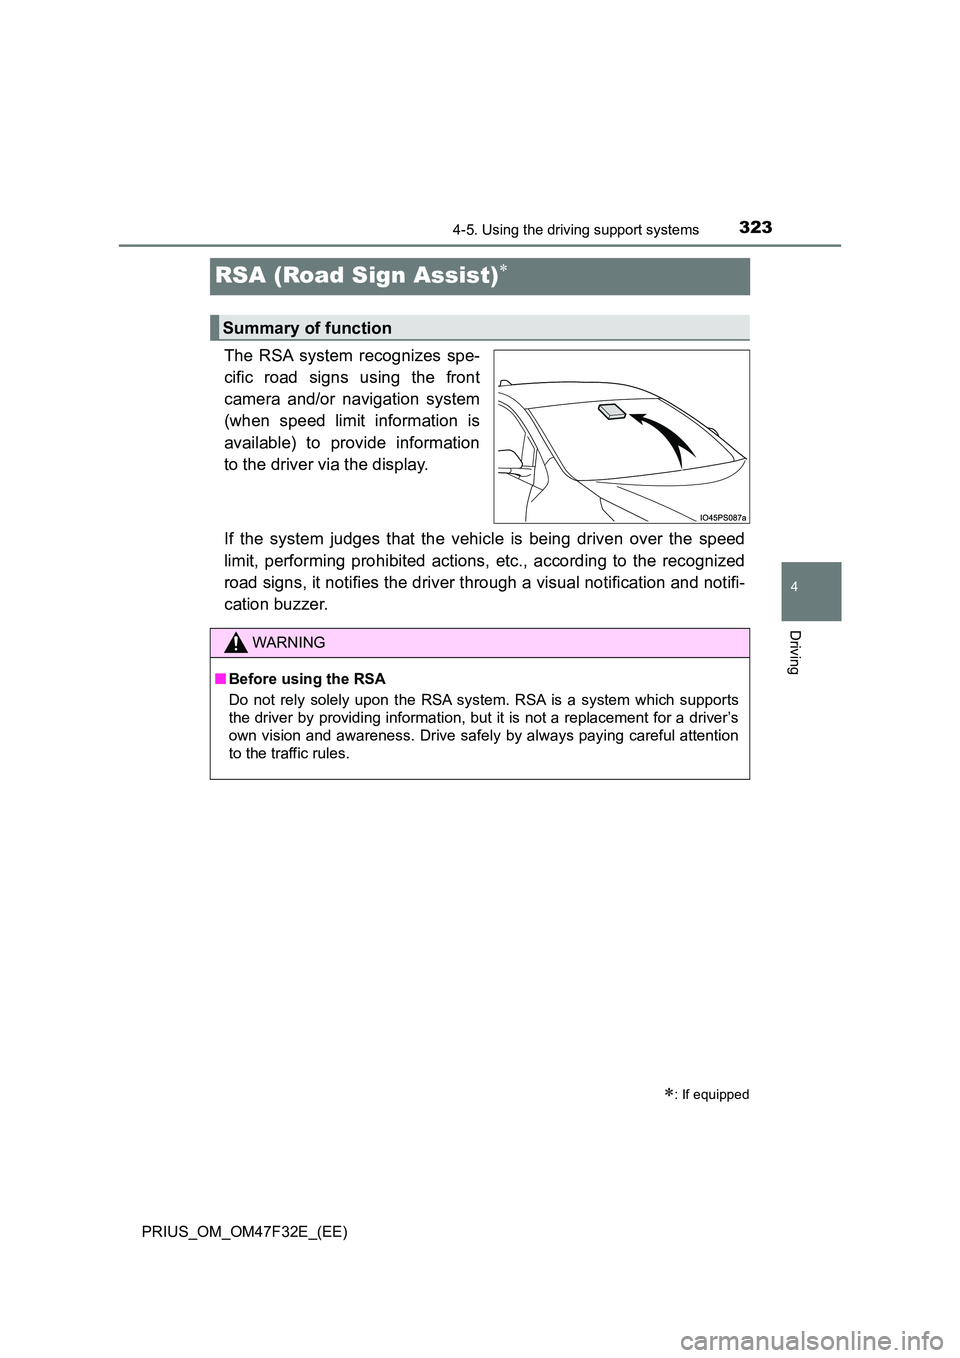 TOYOTA PRIUS 2023  Owners Manual 323
4
4-5. Using the driving support systems
Driving
PRIUS_OM_OM47F32E_(EE)
RSA (Road Sign Assist)
The RSA system recognizes spe- 
cific road signs using the front 
camera and/or navigation system 